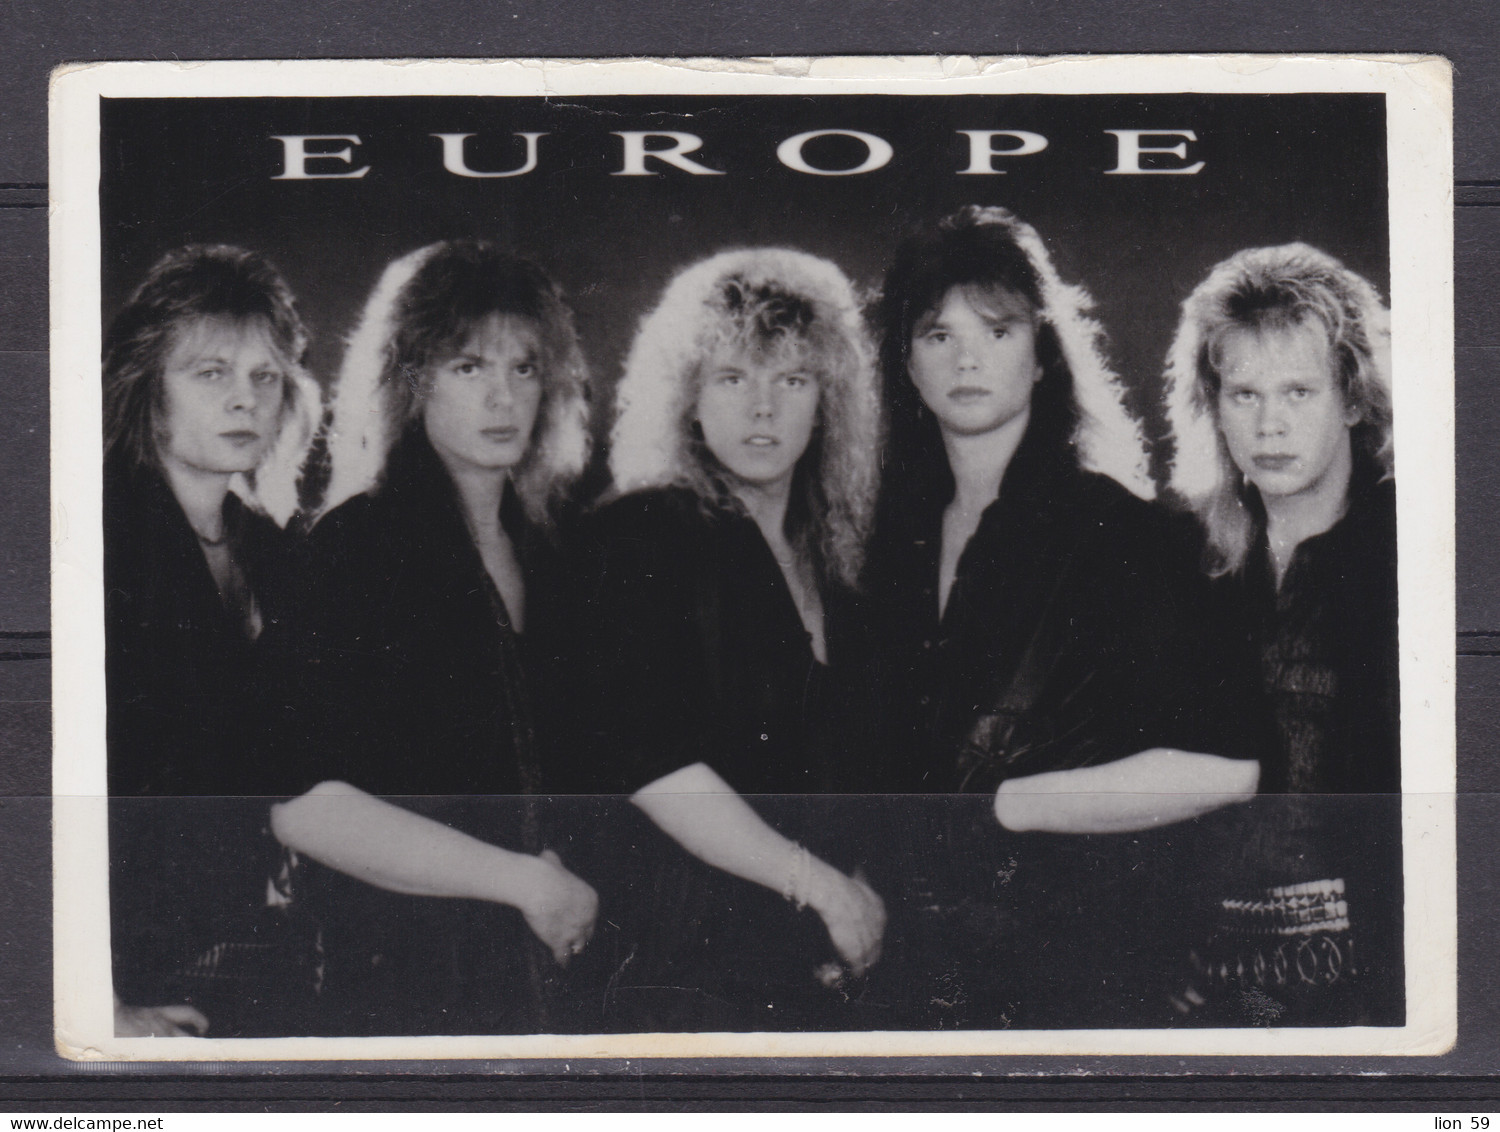 272897 / Europe (band) - Swedish Rock Band Formed In Upplands Väsby, Sweden In 1979, By Frontman Joey Tempest Photo - Foto